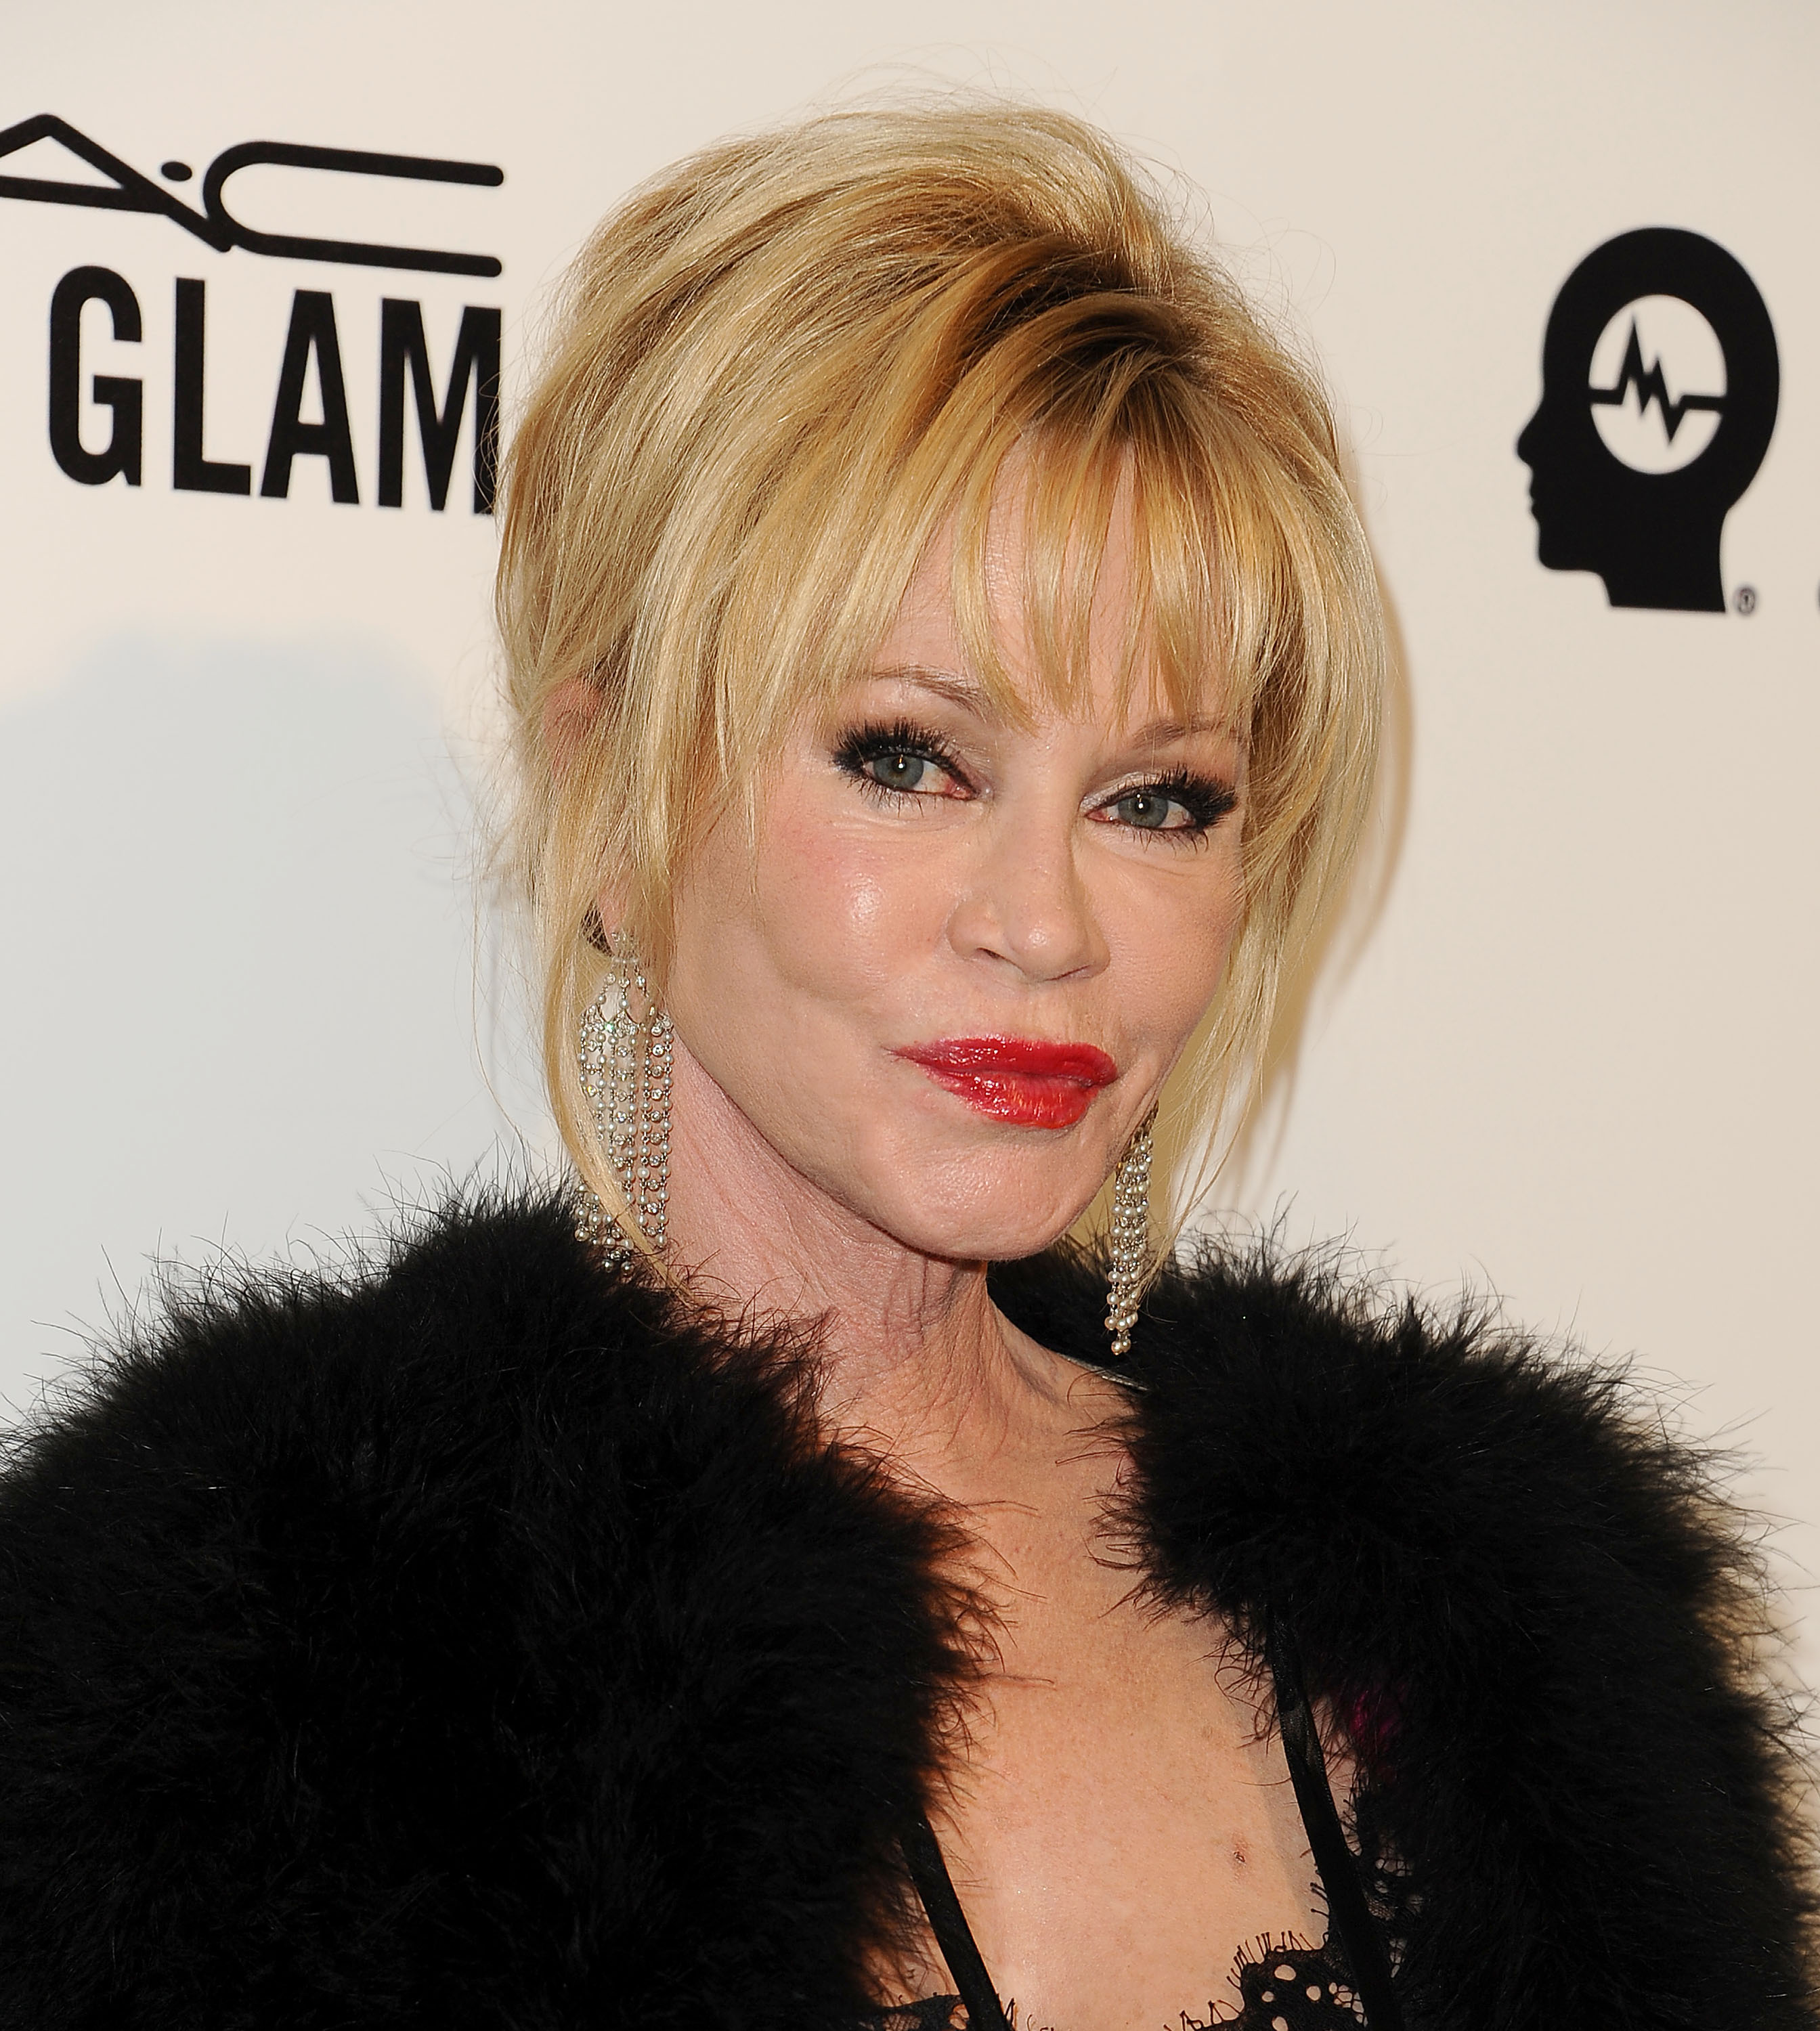 Melanie Griffith at the 24th annual Elton John AIDS Foundation's Oscar viewing party in West Hollywood, California on February 28, 2016 | Source: Getty Images